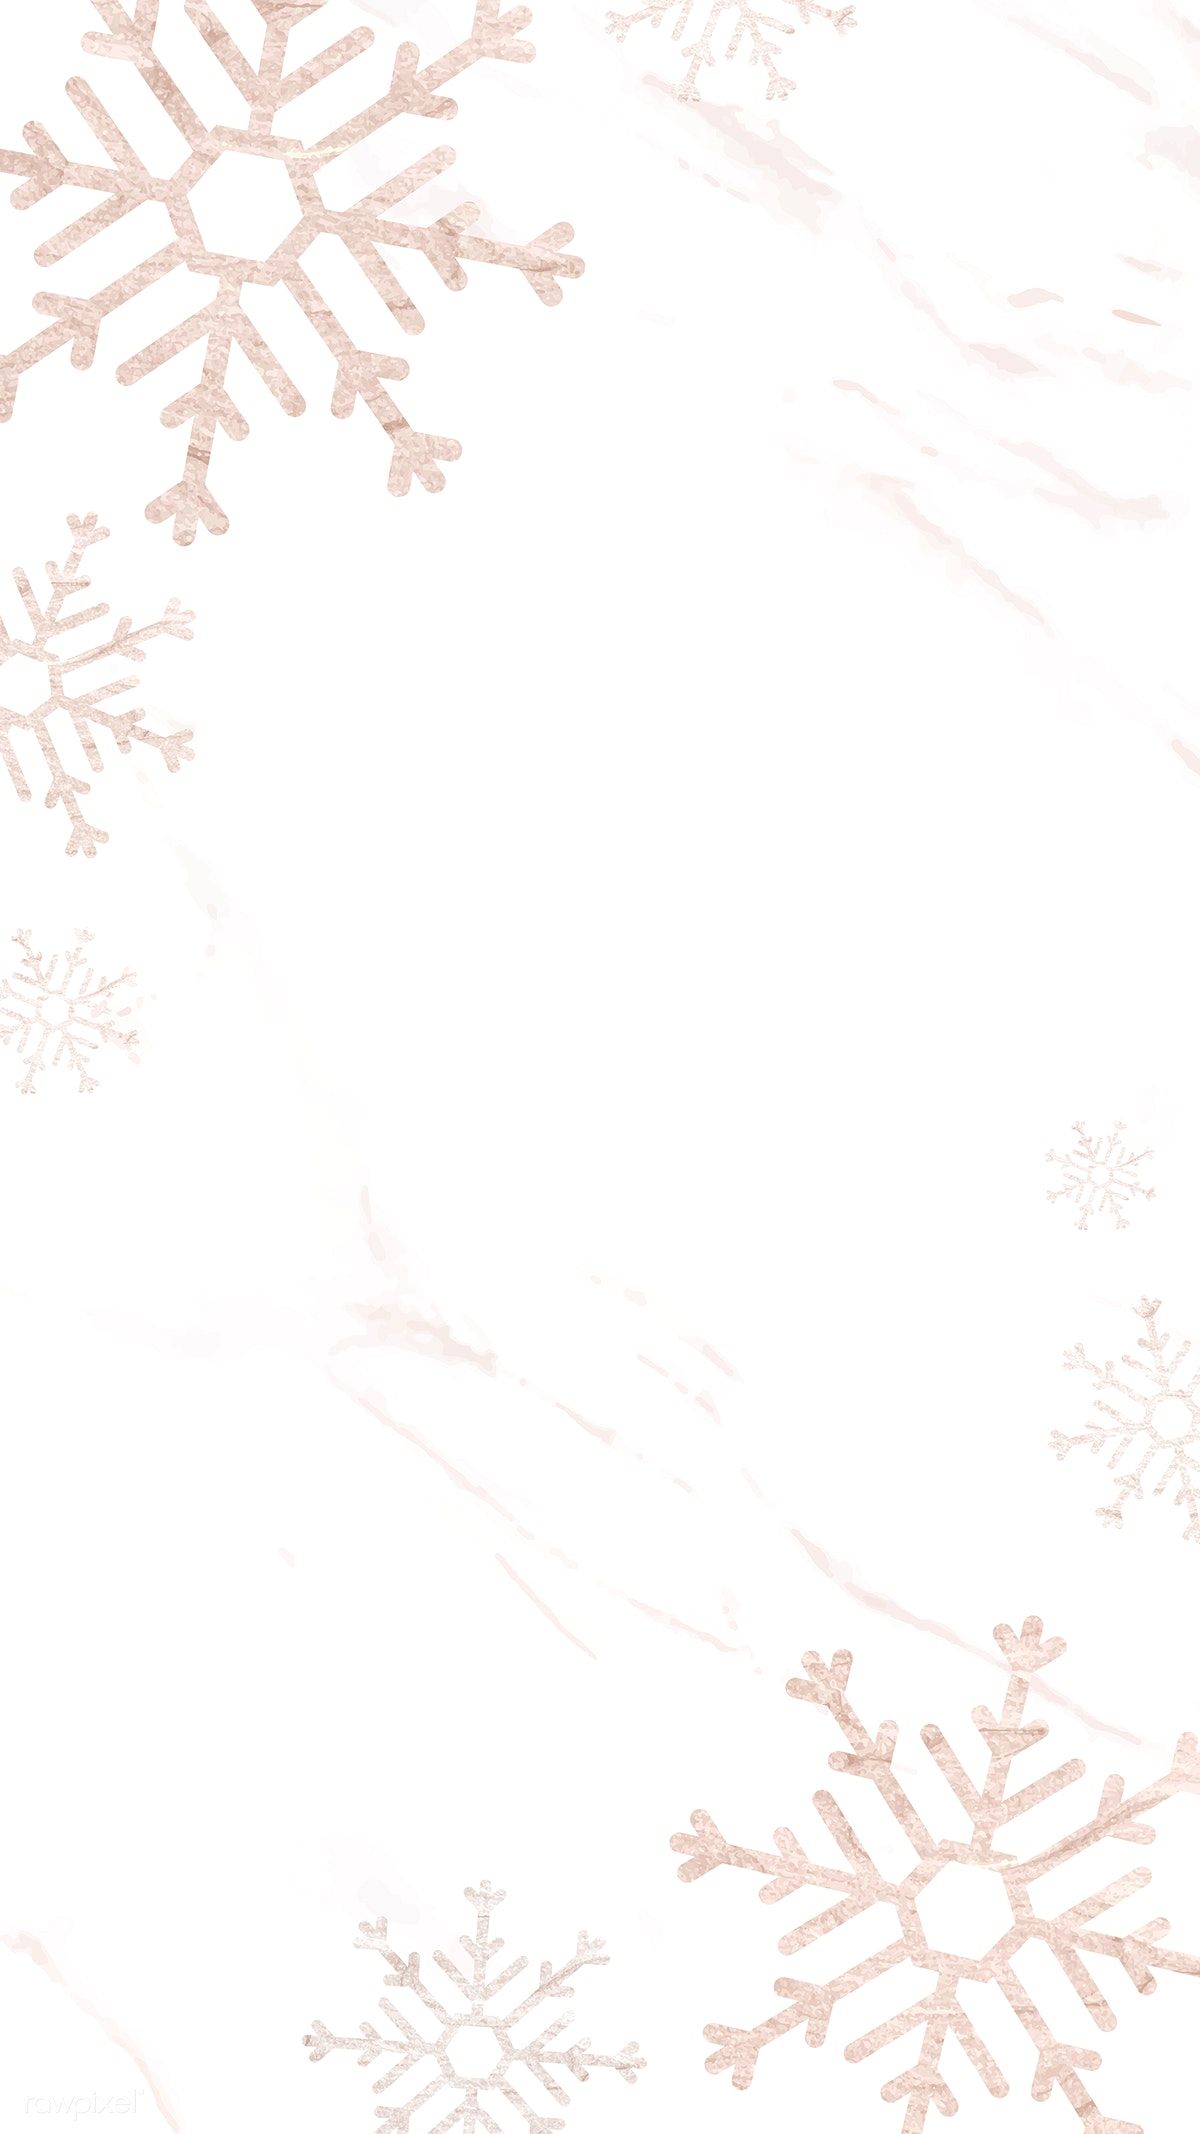 Snowflakes patterned on white mobile phone wallpaper vector. premium image by rawpixel.c. Christmas phone wallpaper, Wallpaper iphone christmas, Winter wallpaper